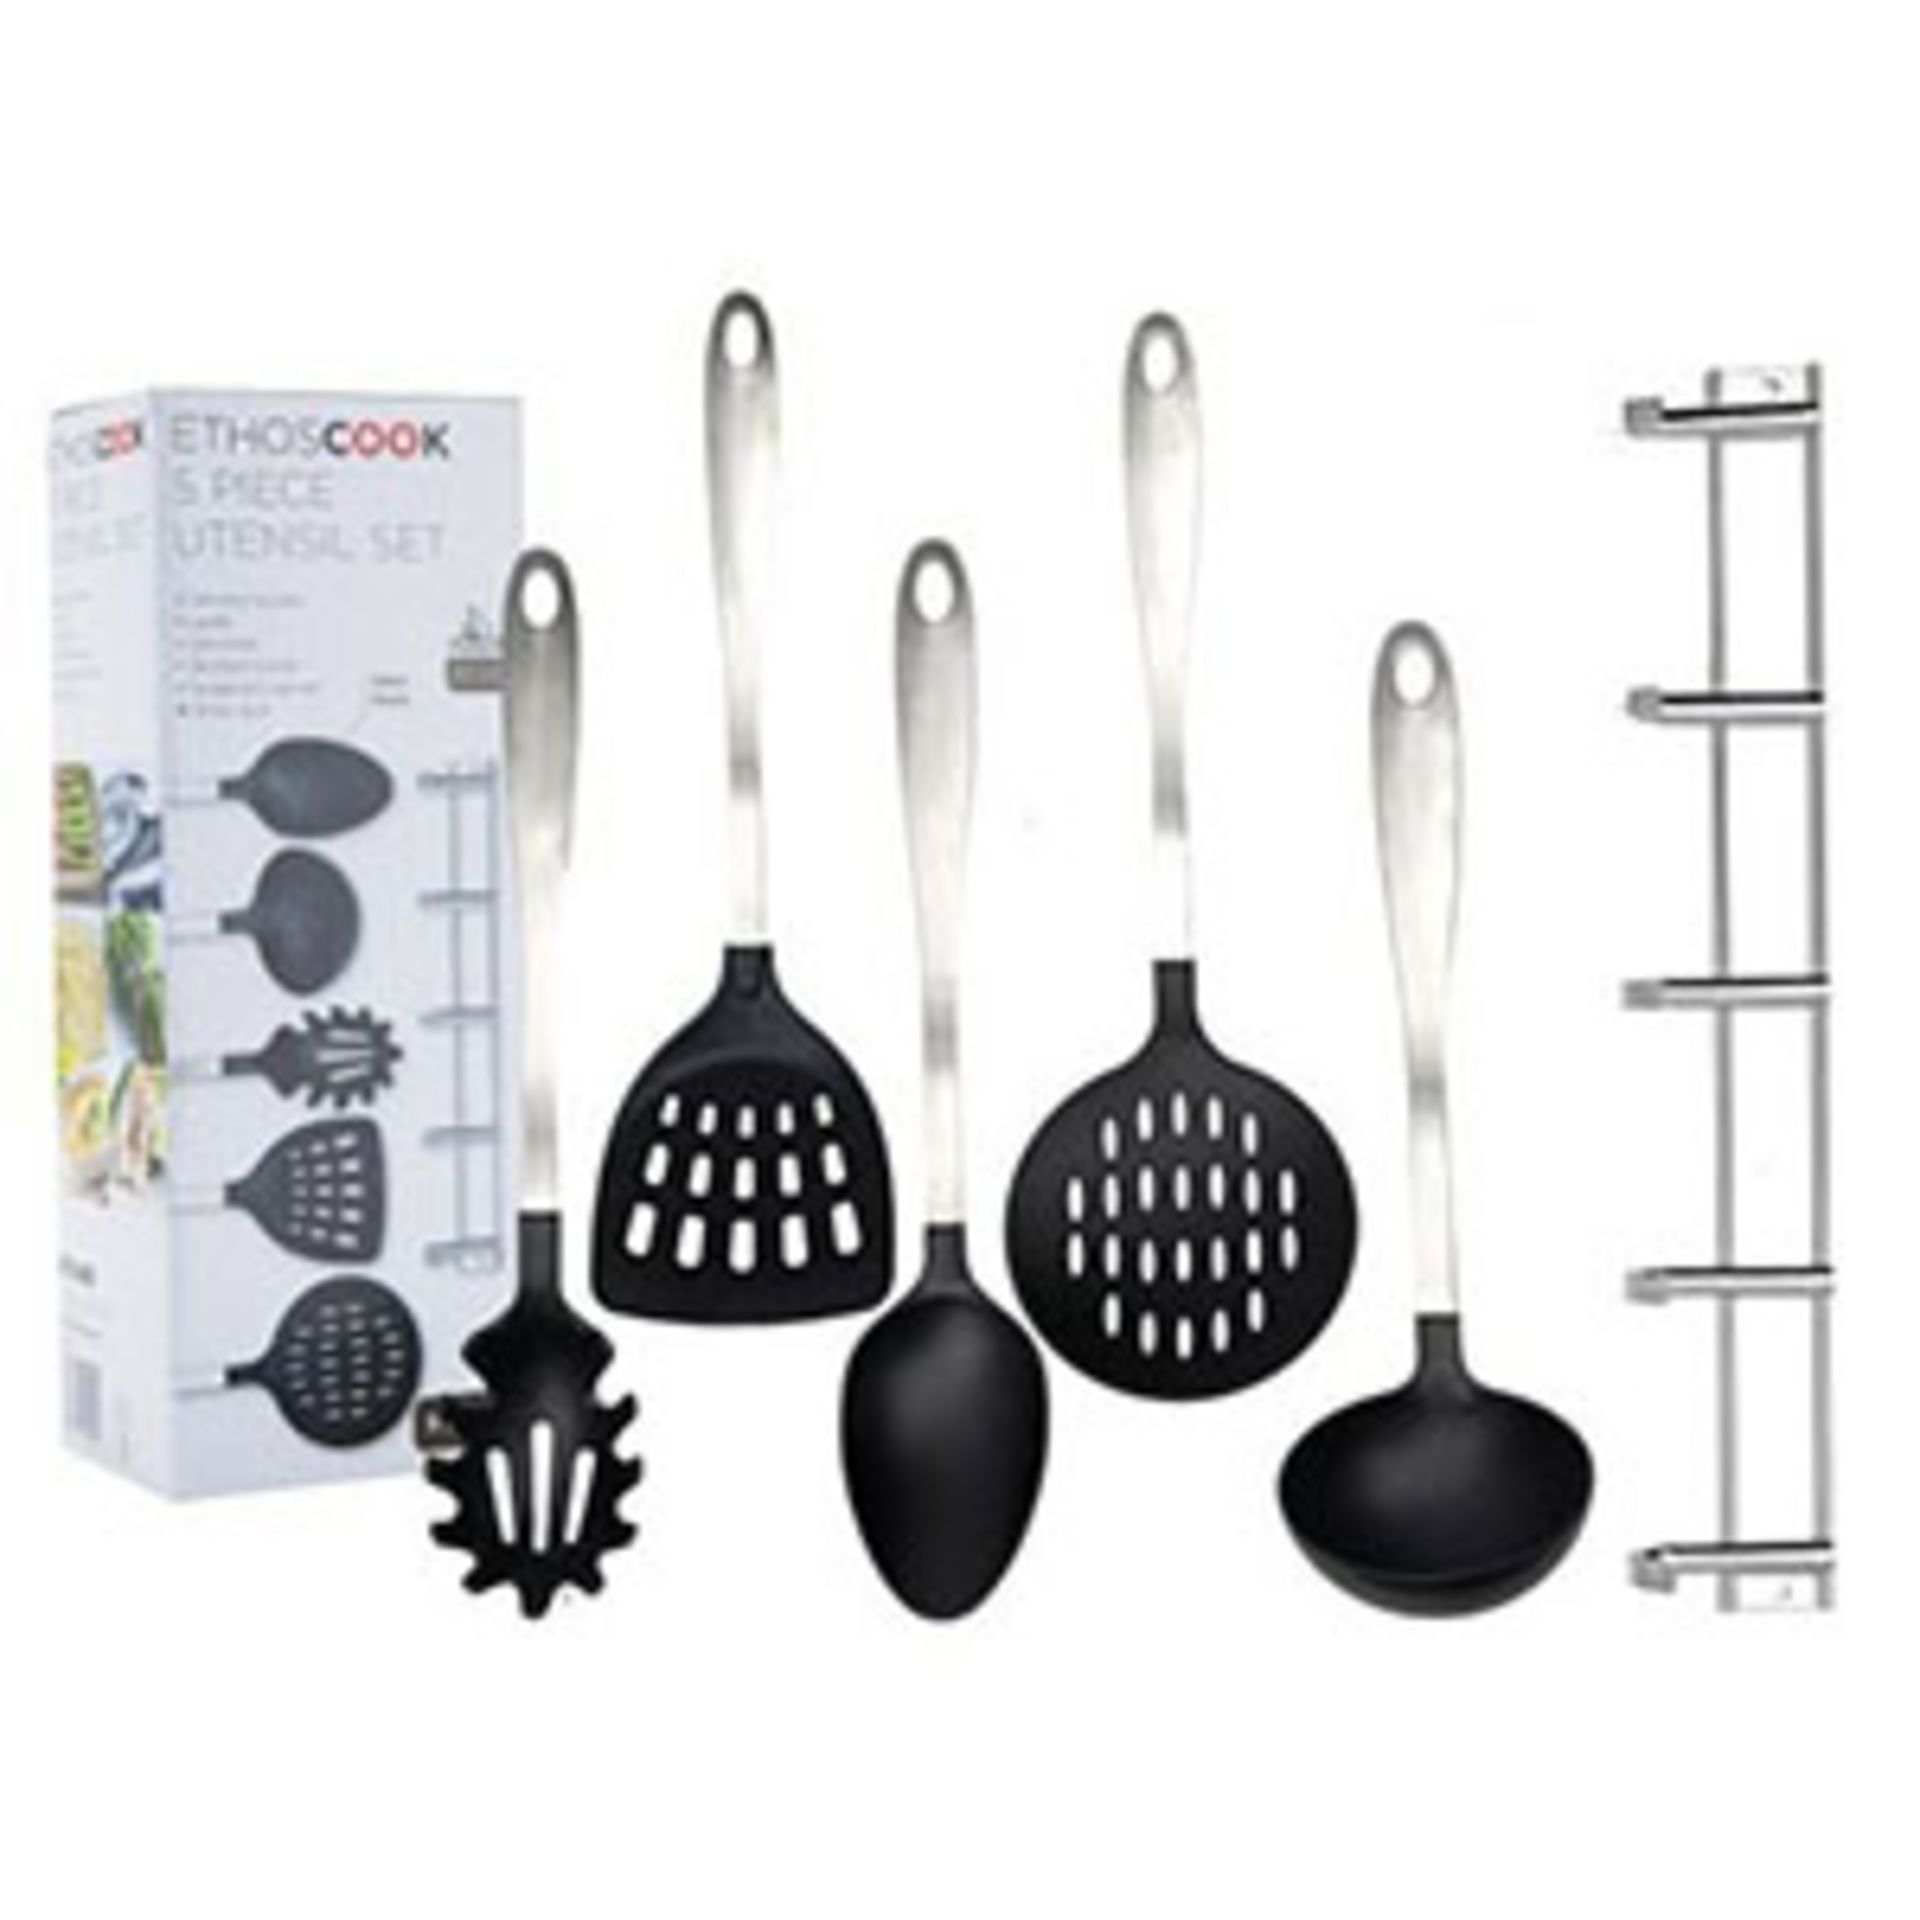 V Brand New Ethos Cook 5 Piece Utensil Set Plus Wire Rack For Wall Mounting - Nylon Heads - Ideal